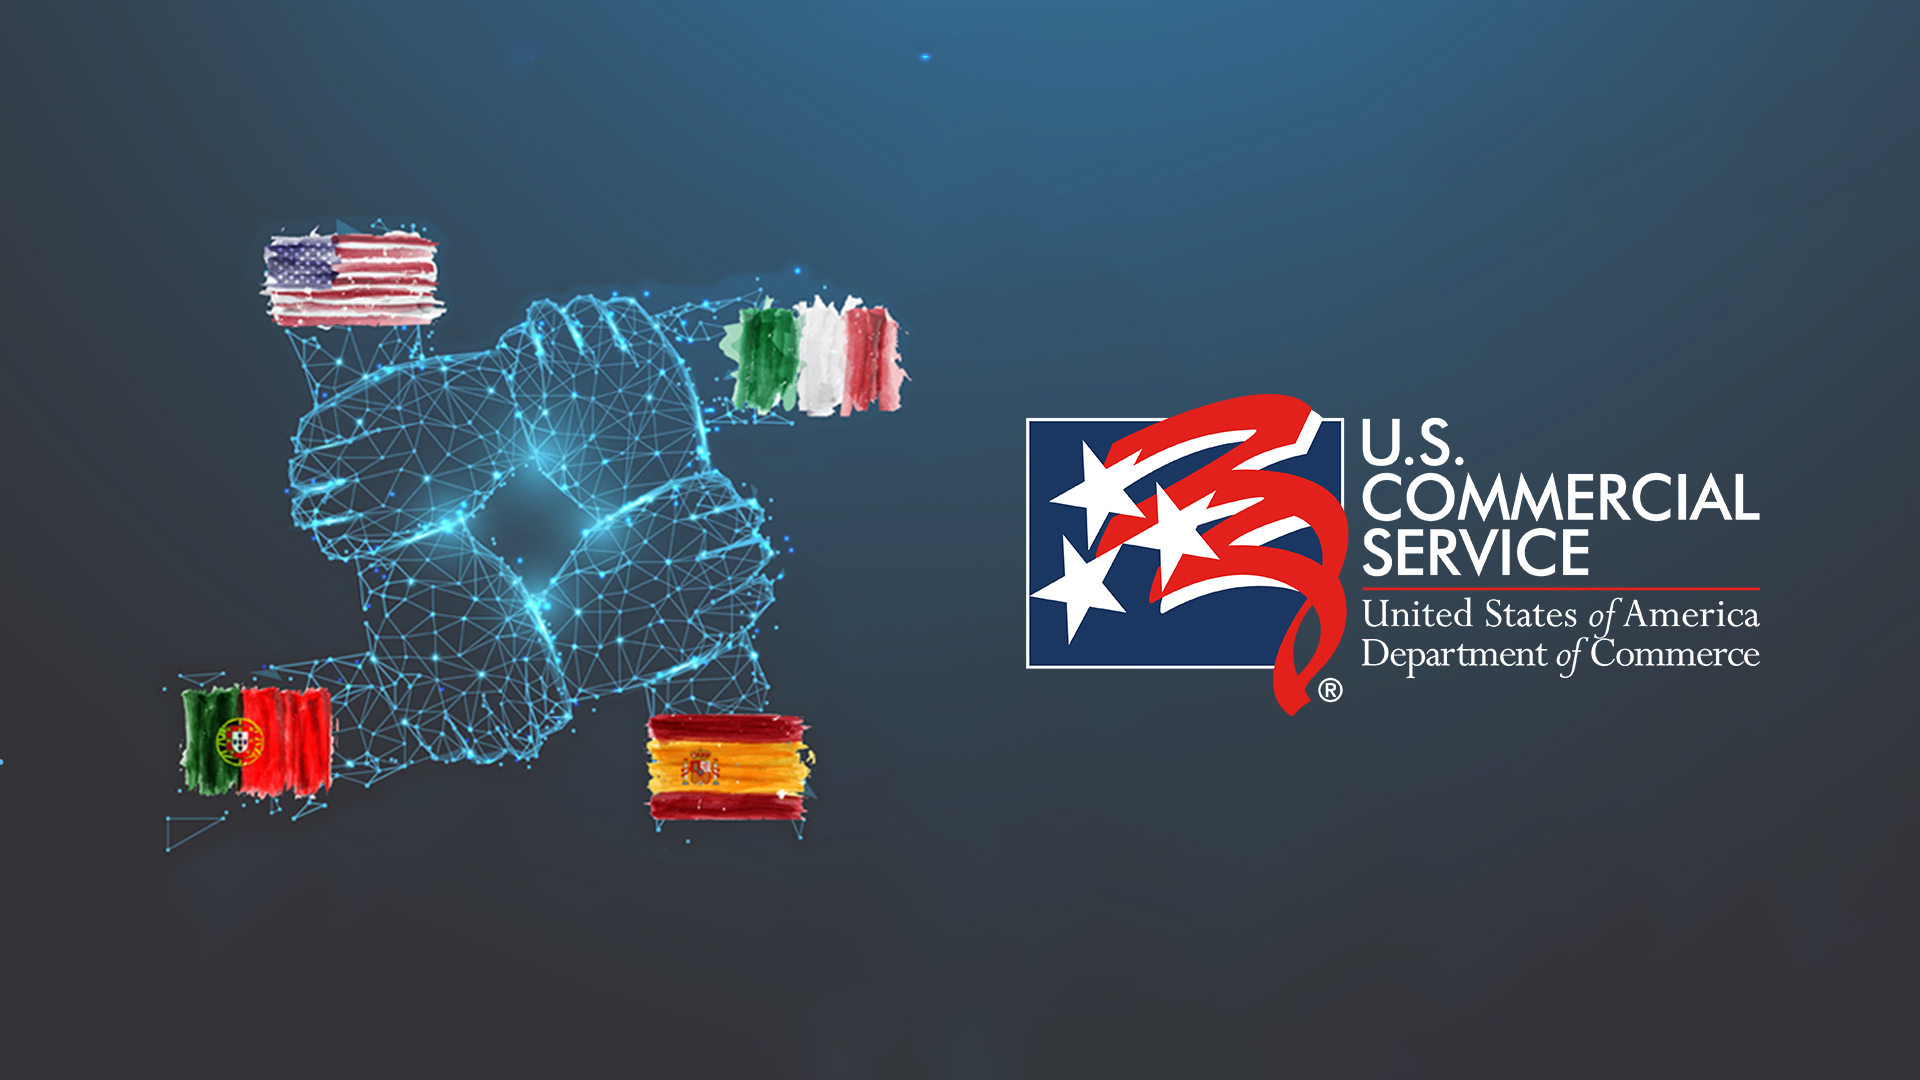 Four Hands computerized 3D image with four flags U.S., Italy, Spain and Portugal with the Commercial Services logo on blue background